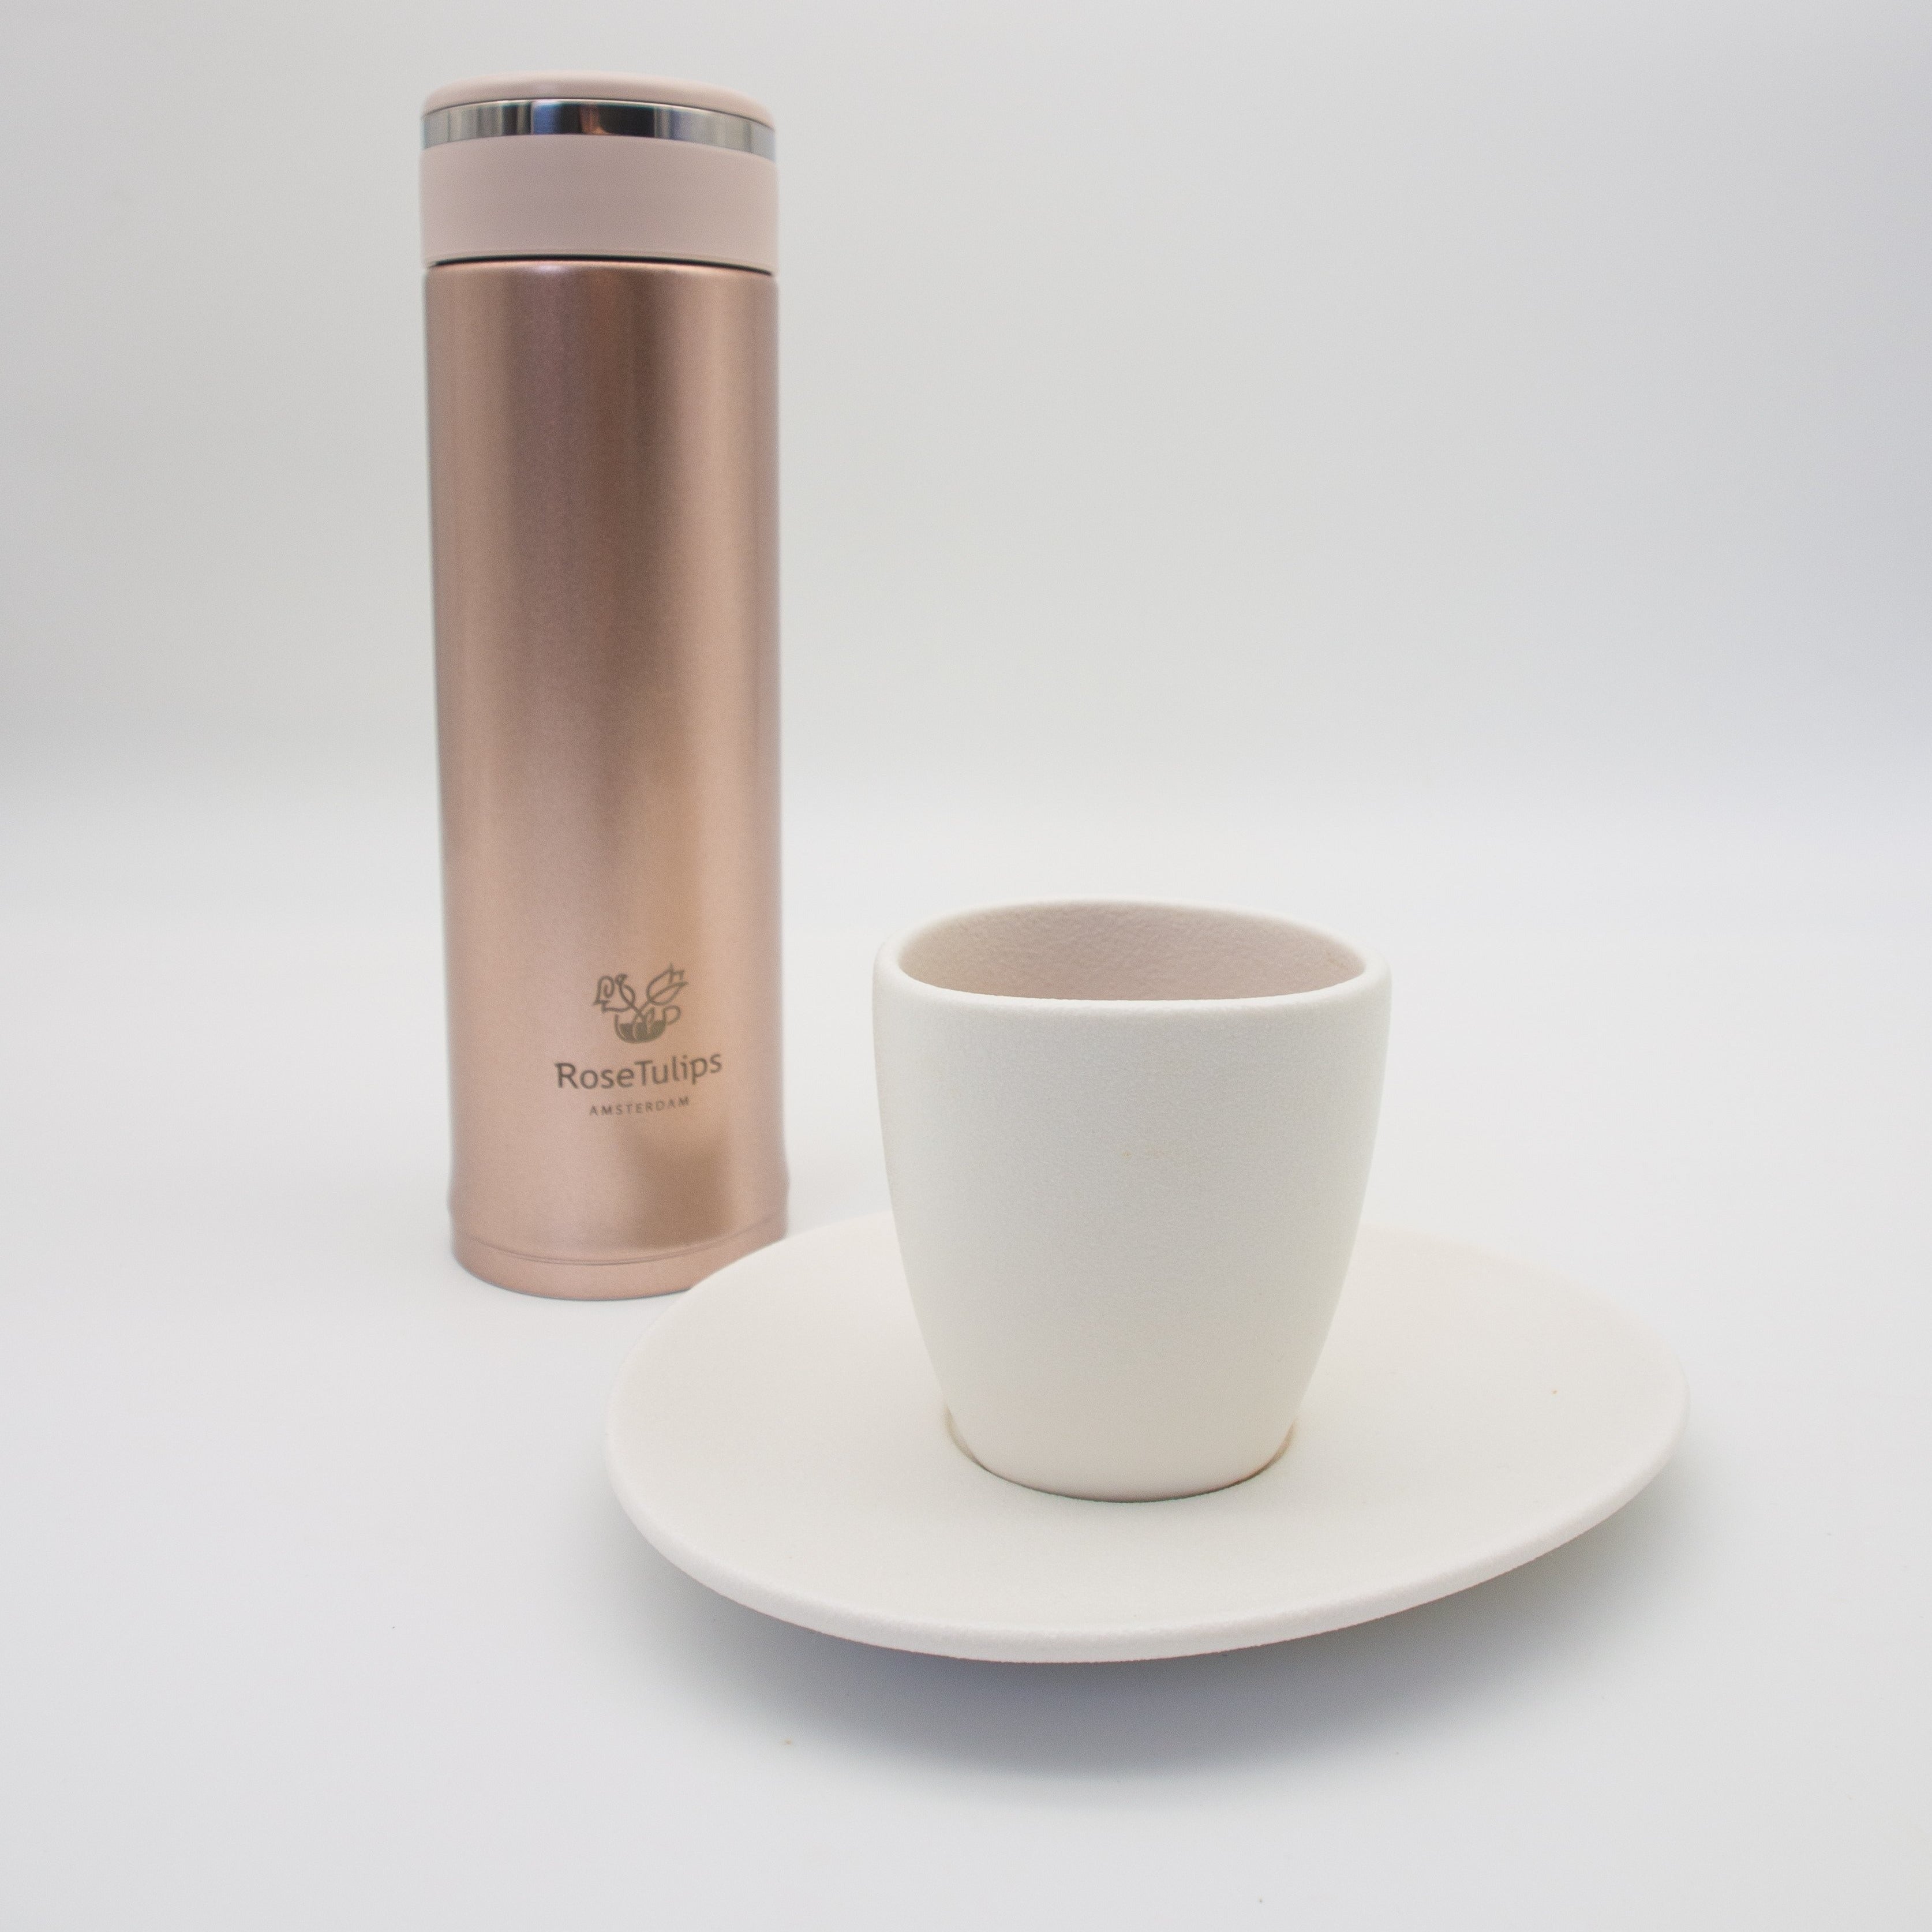 Japanese zojirushi tea flask with leaves infuser